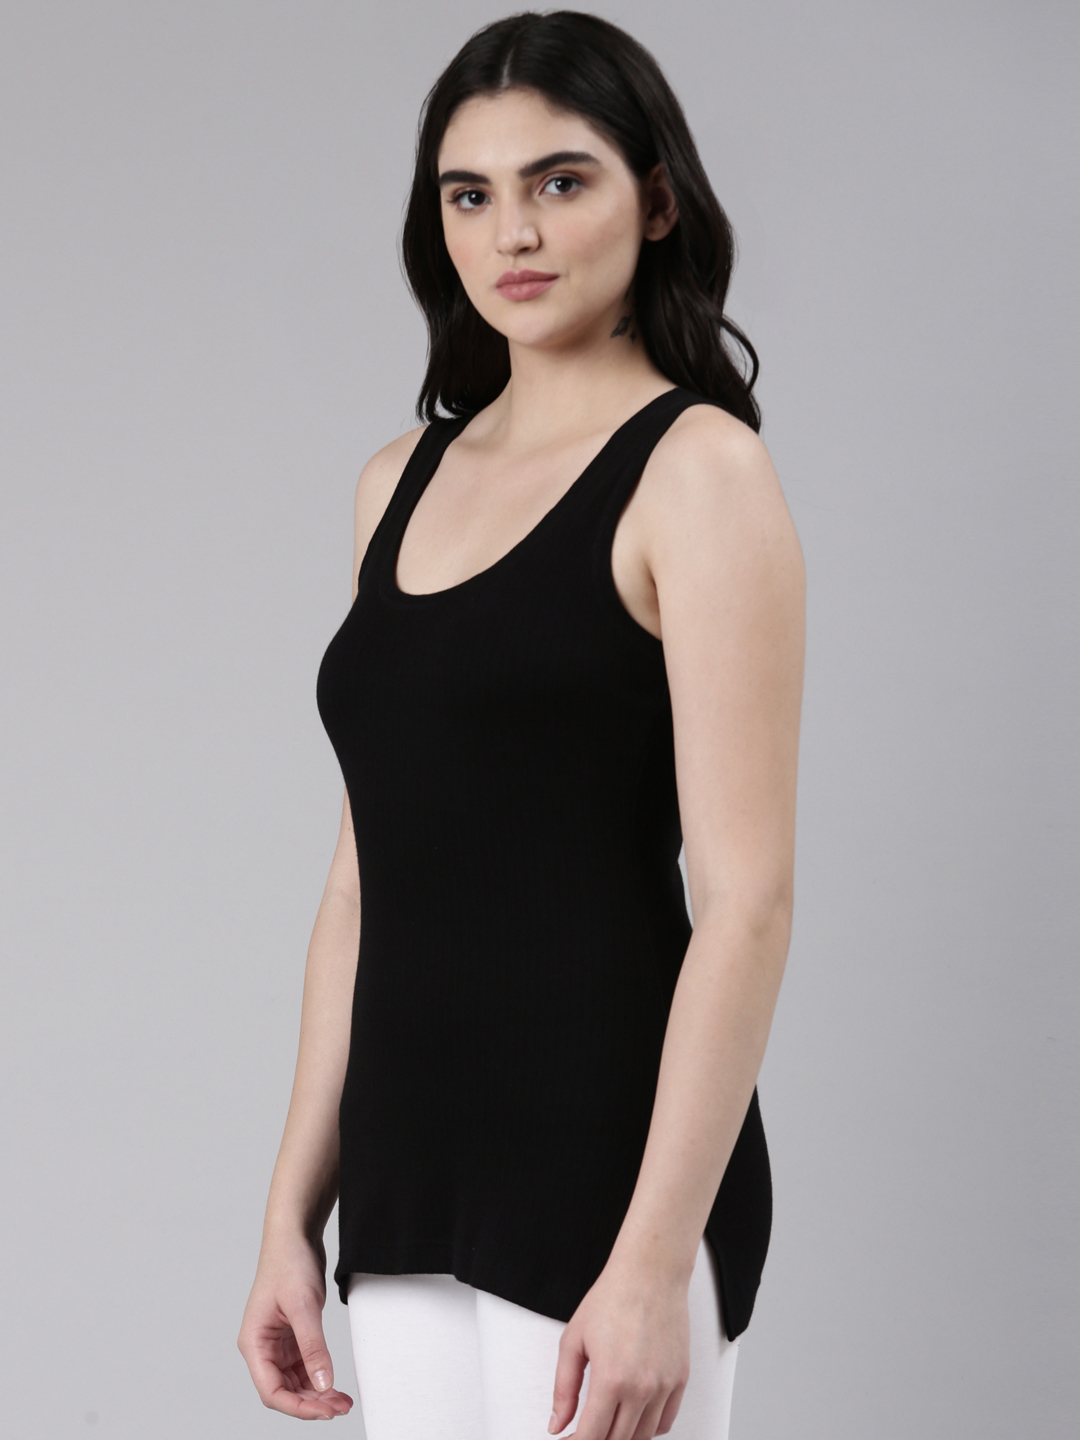 ODGAR Sleeveless Thermal Top combo Women Top Thermal - Buy ODGAR Sleeveless  Thermal Top combo Women Top Thermal Online at Best Prices in India